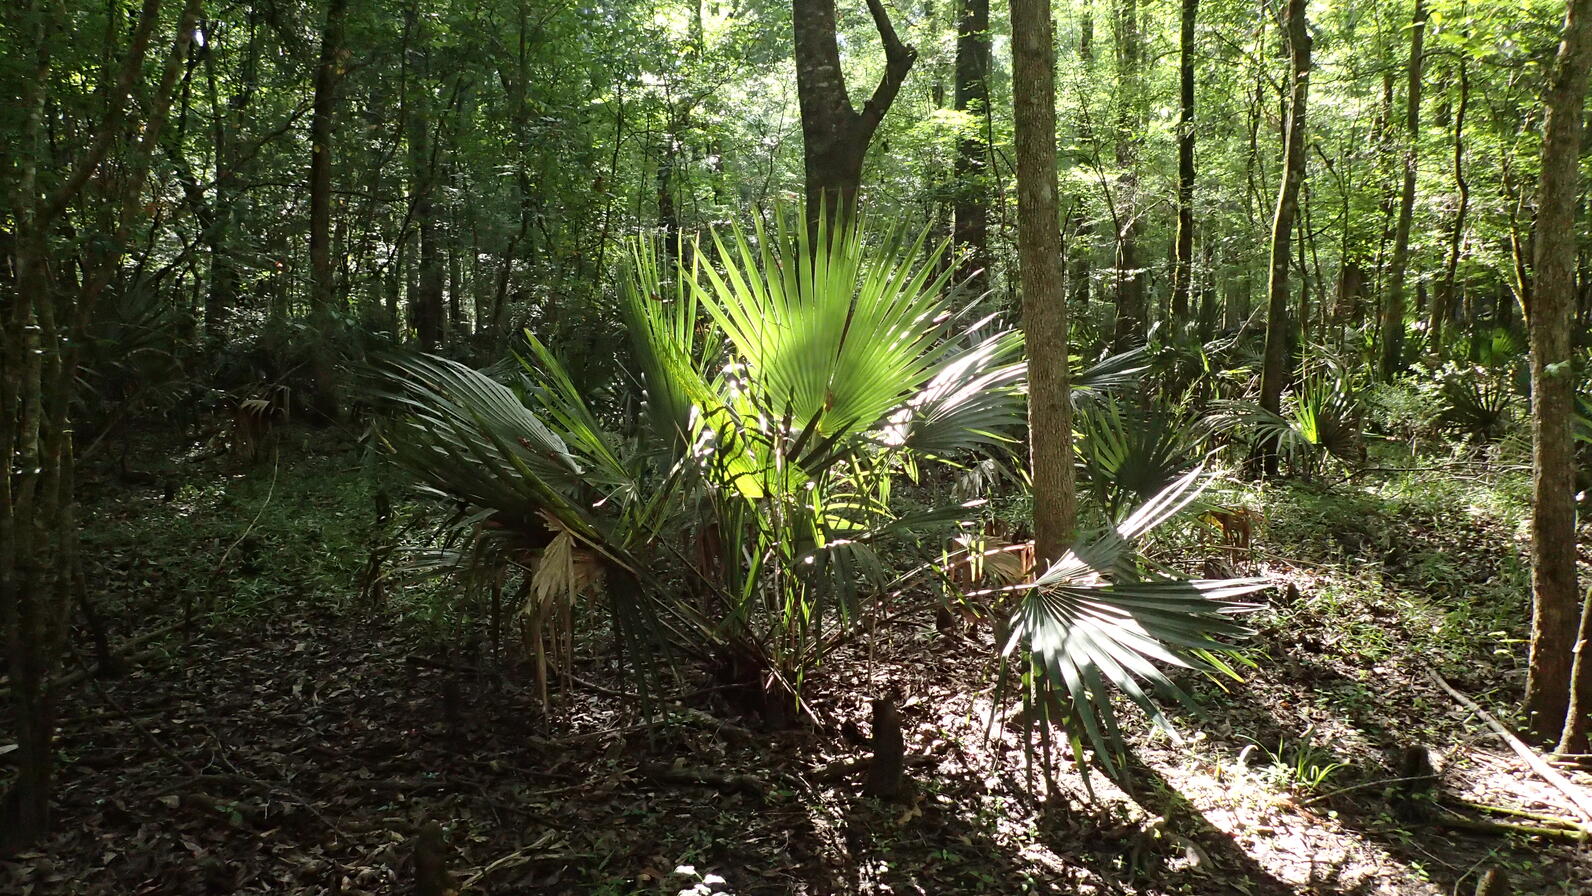 A dwarf palmetto's large, three foot wide fronds bend in all directions away from the plant. From behind sunlight pierces a few of the fronds, giving them a warmer appearance.